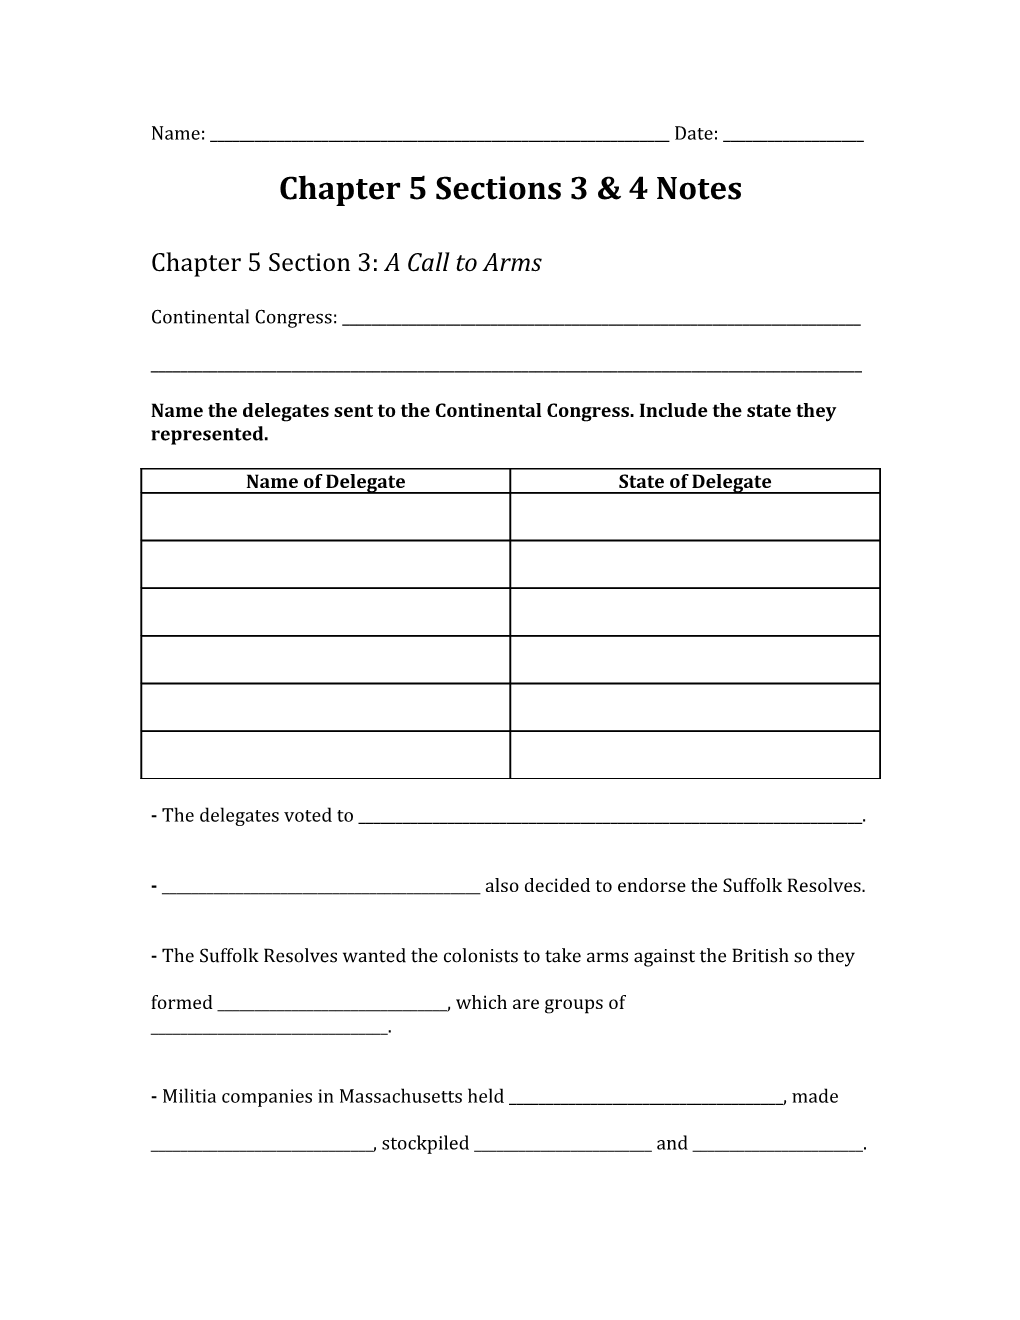 Chapter 5 Sections 3 & 4 Notes